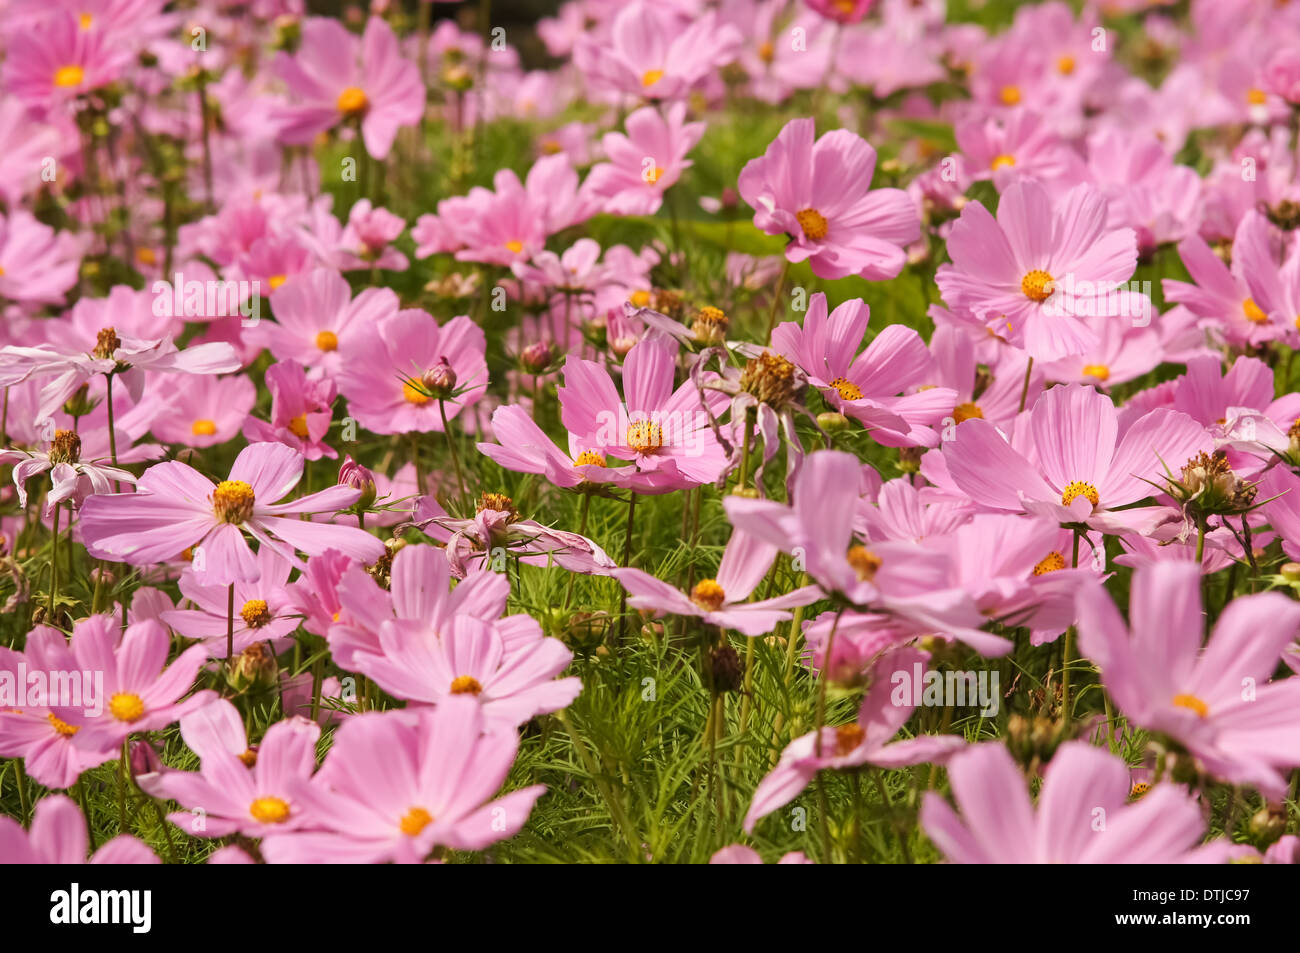 Pink Cosmos bipinnatus flowers (garden cosmos or Mexican aster or Click Cranberries) in bloom Stock Photo